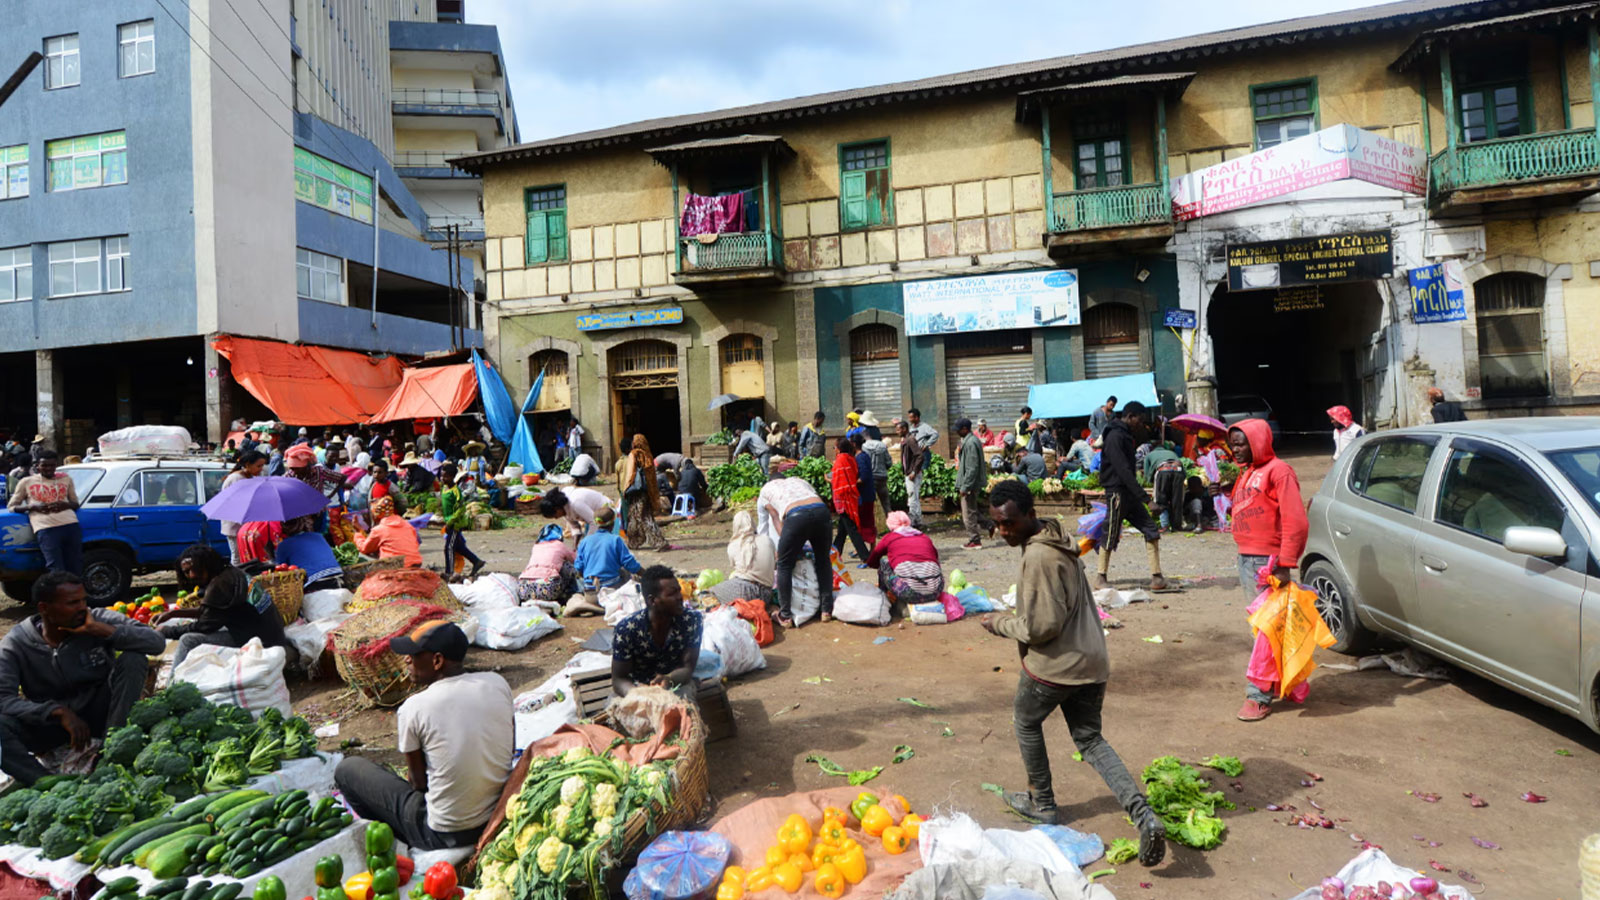 The busy outdoor market at Piassa in Addis Ababa. The neighbourhood is being cleared to make way for a road-widening project. 